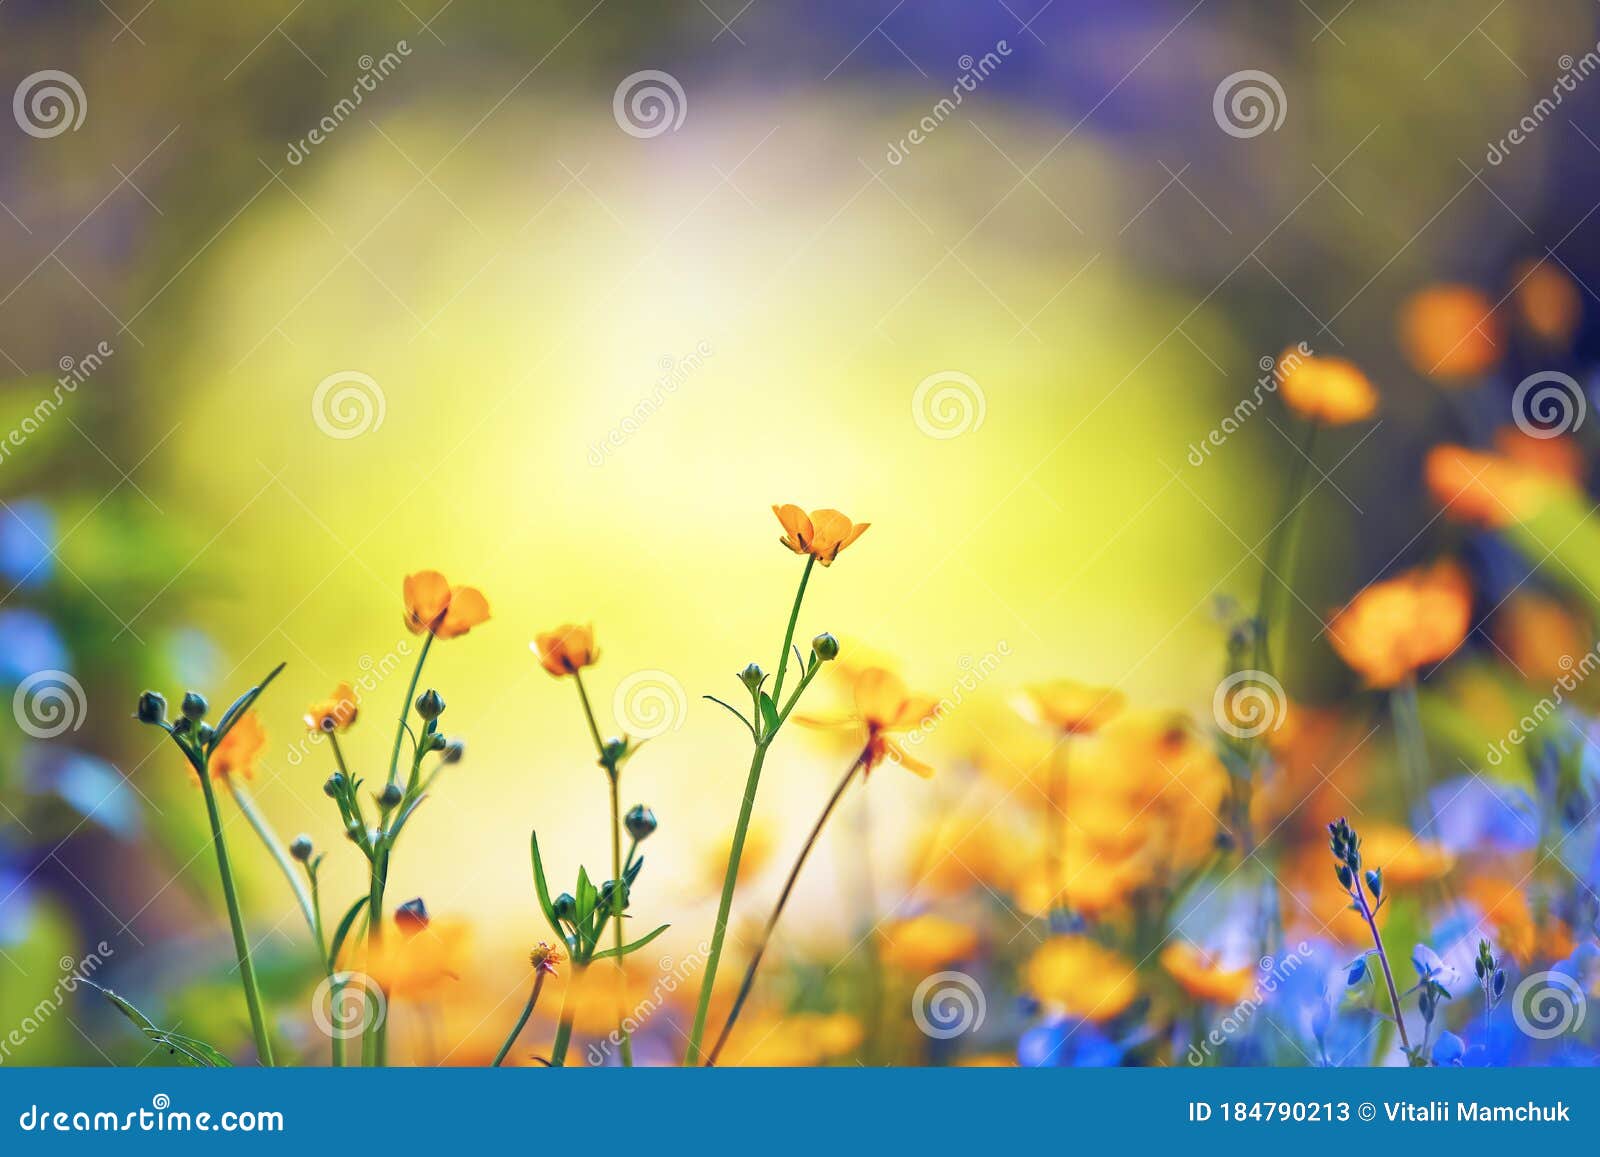 Download Bright Yellow Tulips Blooming Behind a Fence in Early Spring  Wallpaper  Wallpaperscom